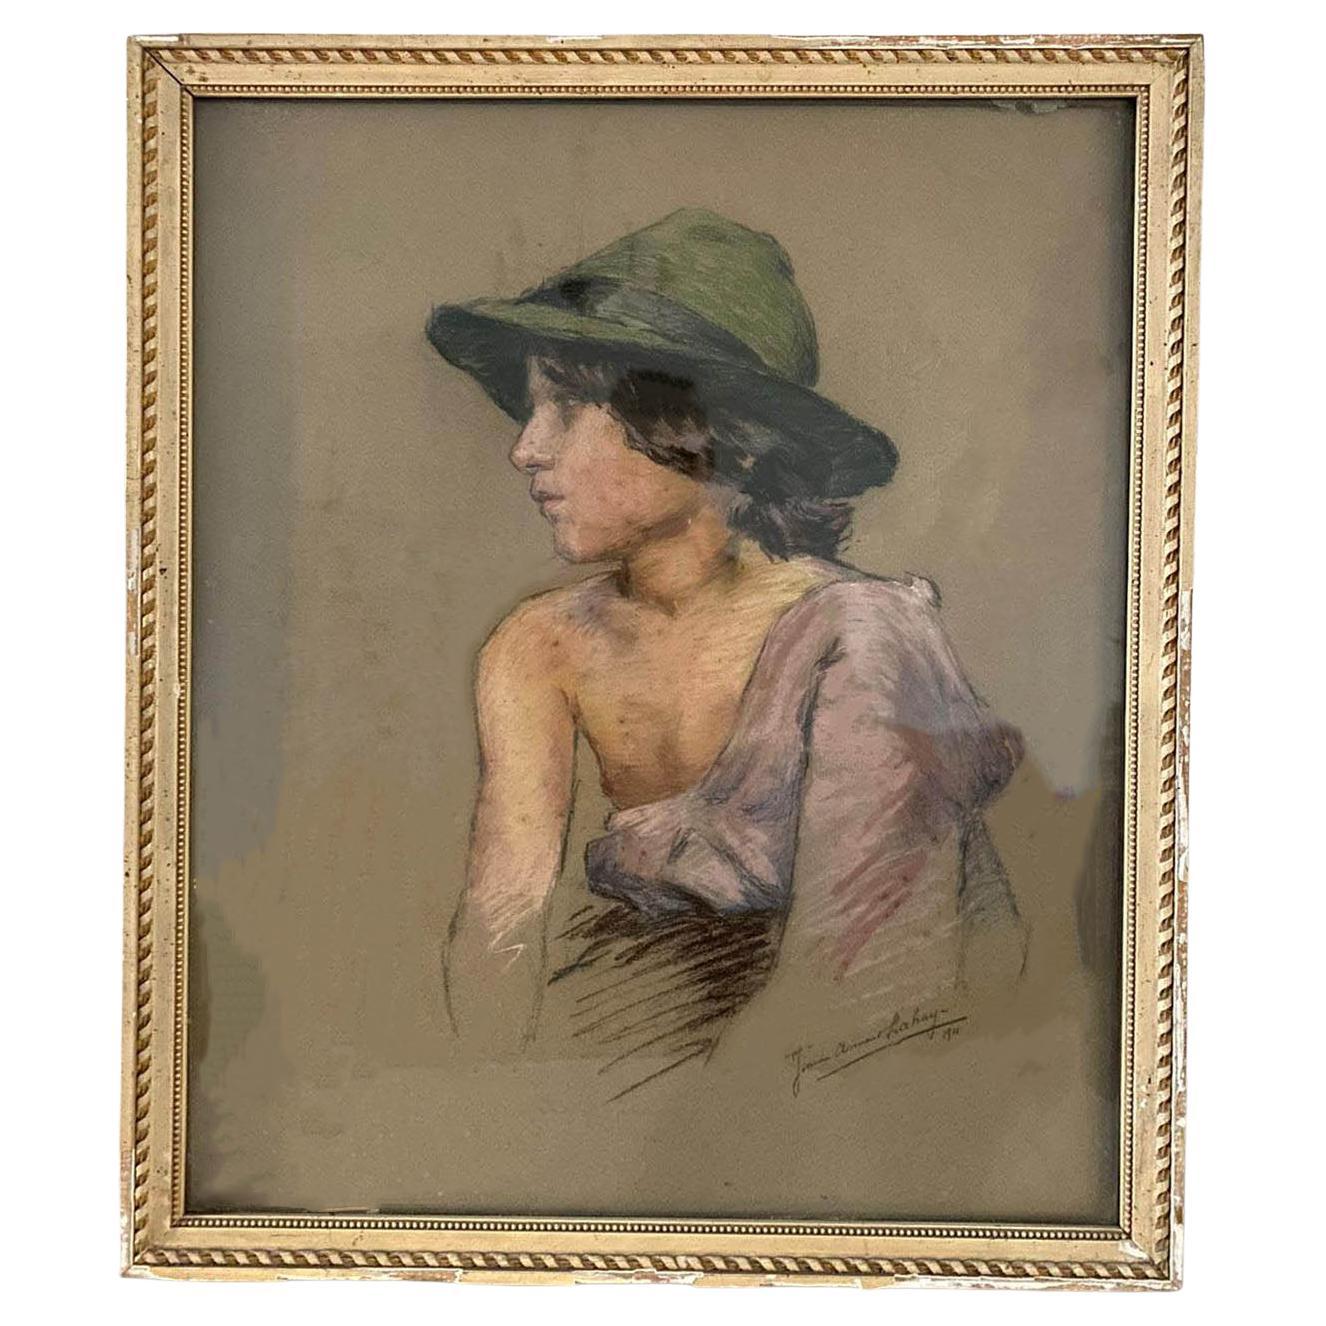 This charming portrait is by the French artist named Jeanne Asimand Lahaye. It is dated 1911. 

The portrait shows a young man in profile, looking like a shepherd. It is done in pastel, giving some life at the young man. The drawing is of good